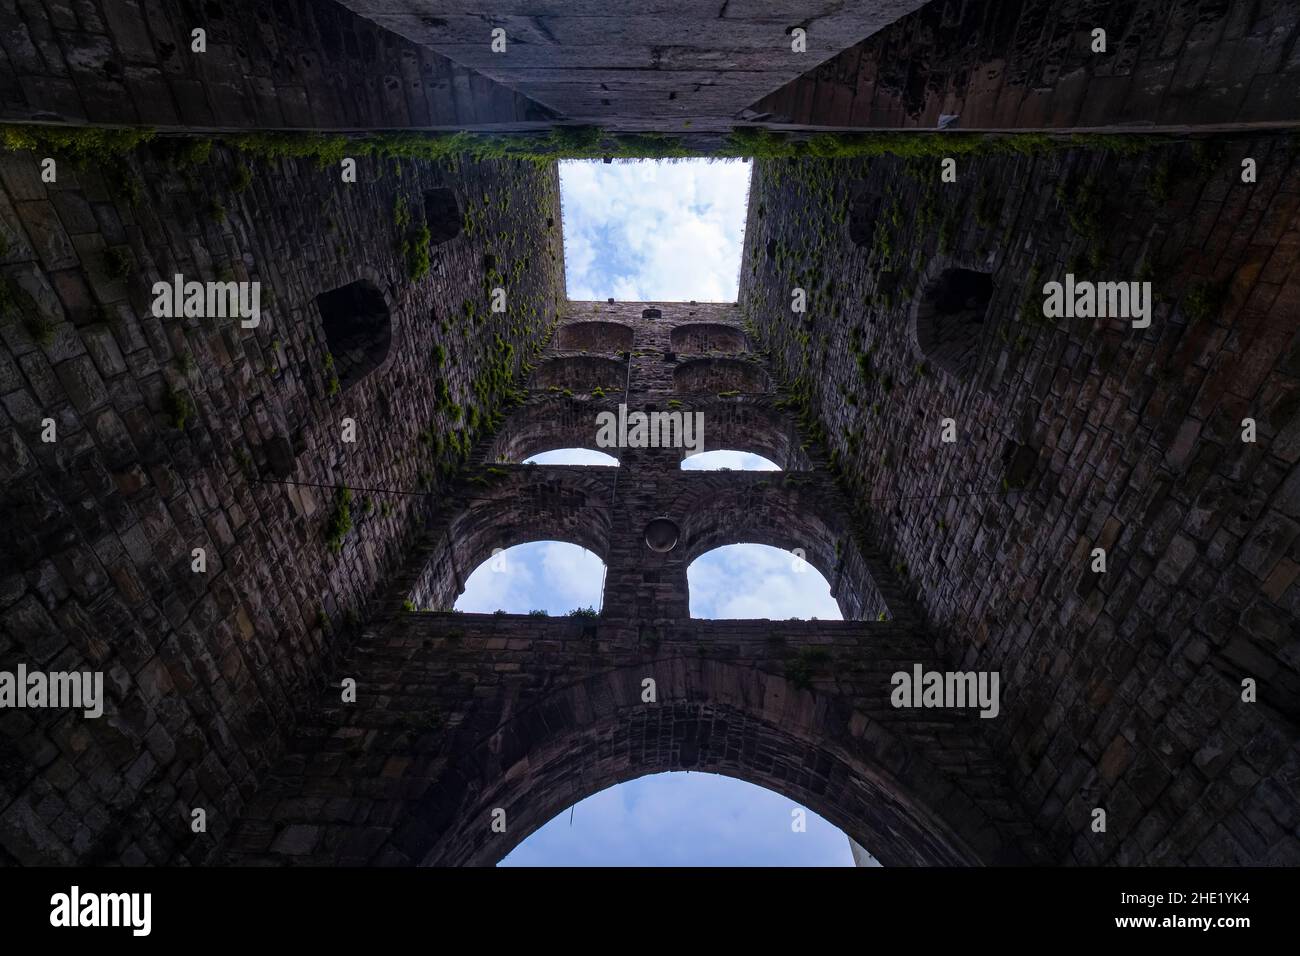 Porta Torre, Tower Gate, located at Piazza Vittoria, was completed in 1192 and has a hight of 40 meters. Stock Photo